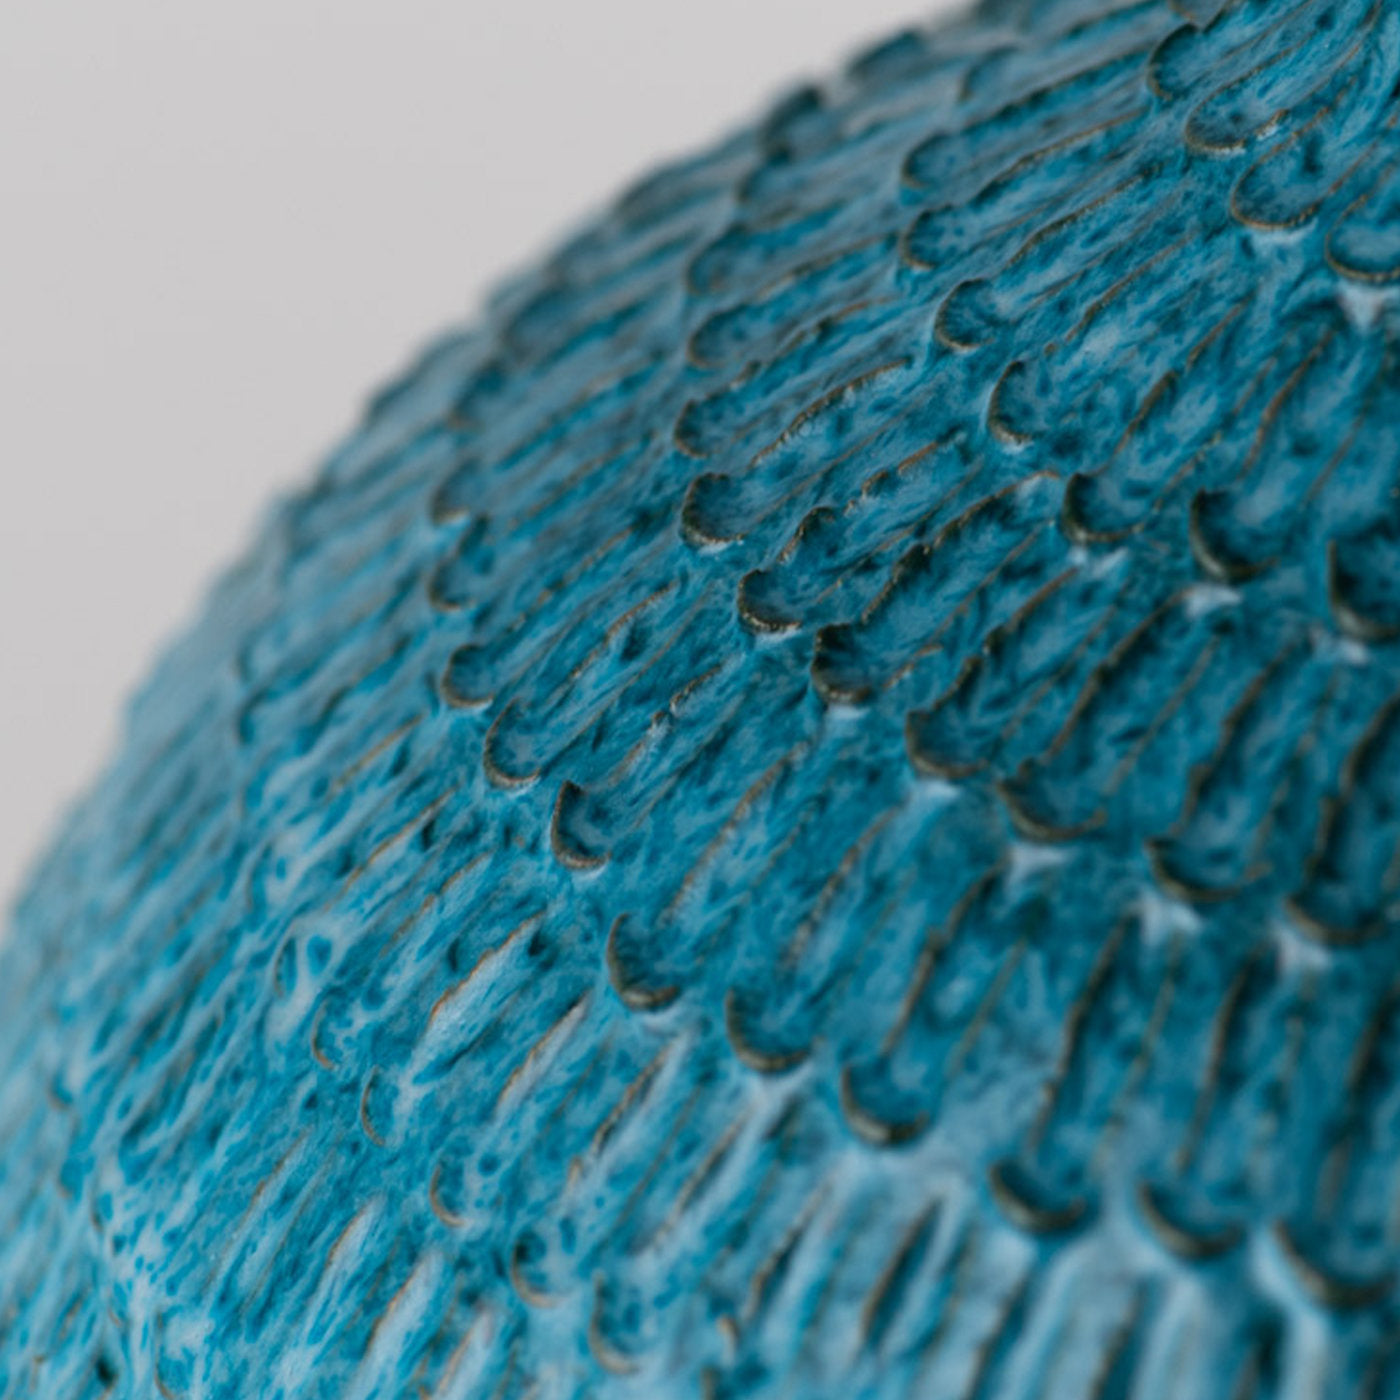 Turquoise Notched Vase - Alternative view 1